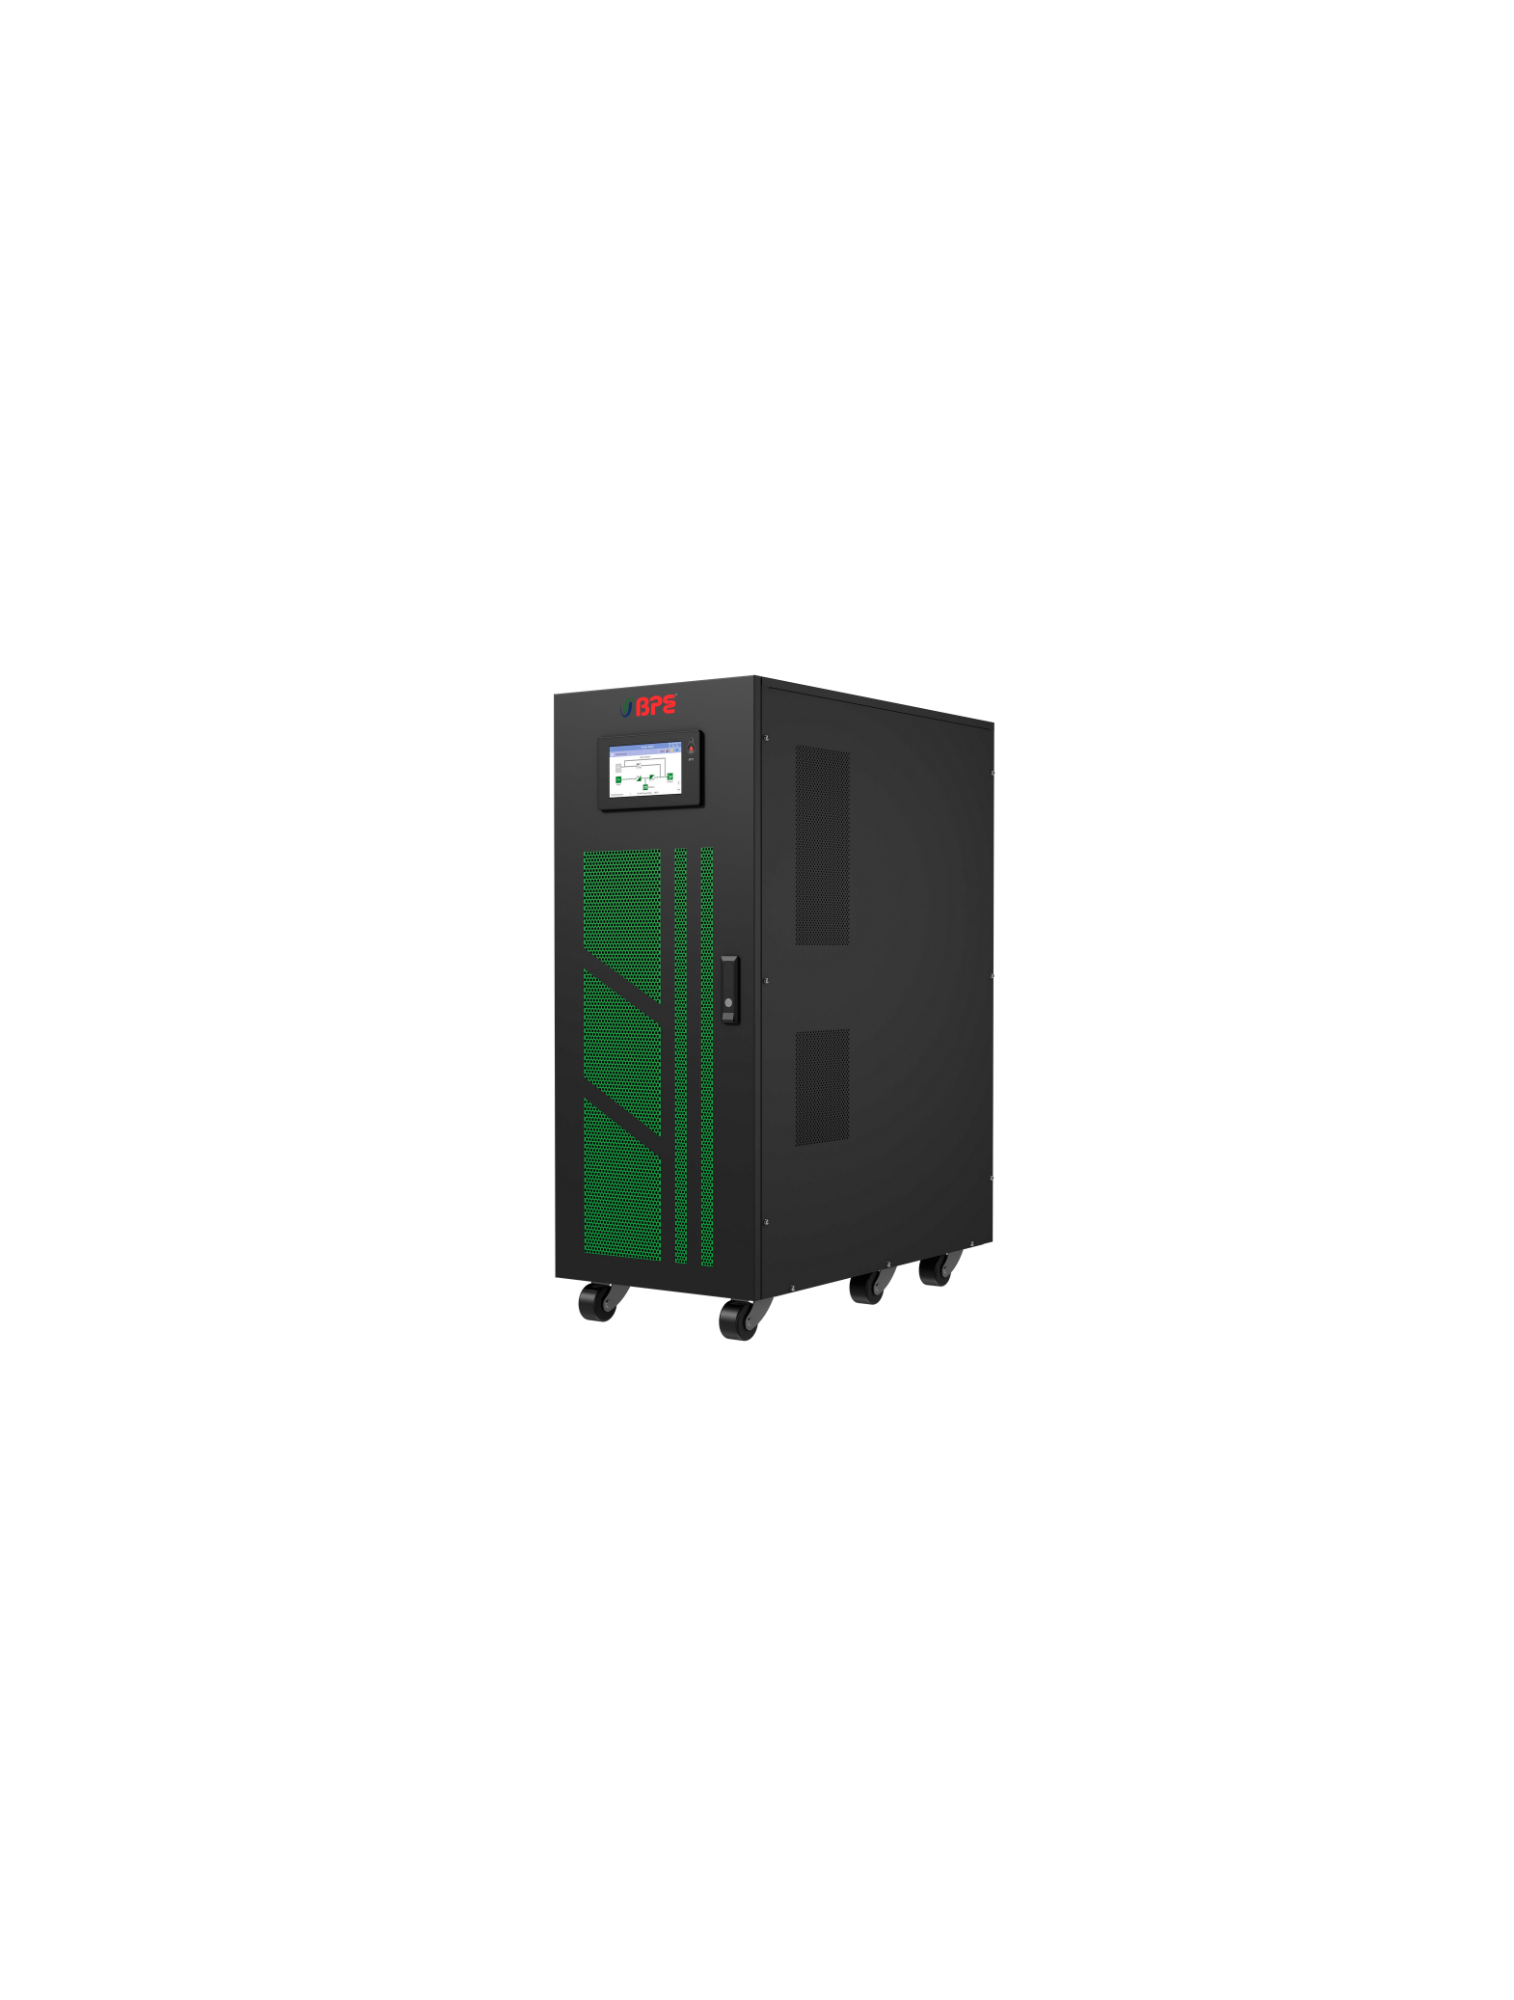 EPX+ Series 60-120kVA